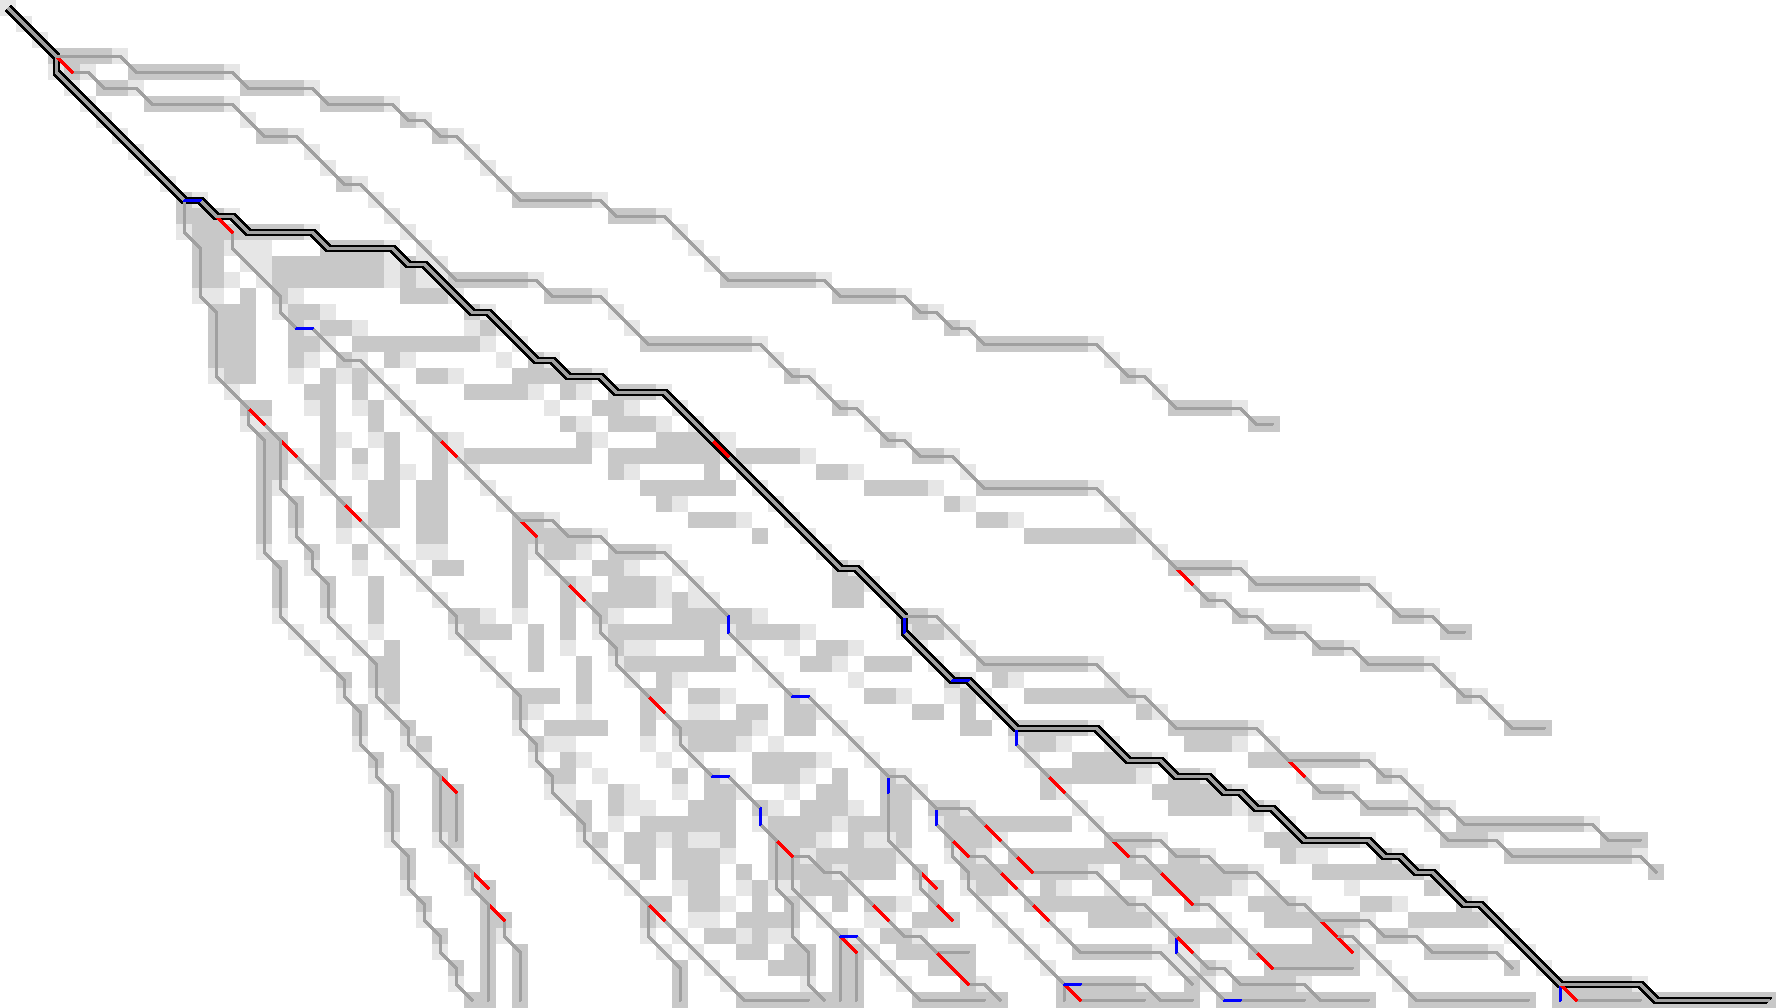 Figure 1: We additionally store indel edges when the path changes the direction of the change of diagonals. These additional edges are shown in blue. In total, for this sample we need to store around 50 parent states to have enough information to reconstruct all tracebacks.